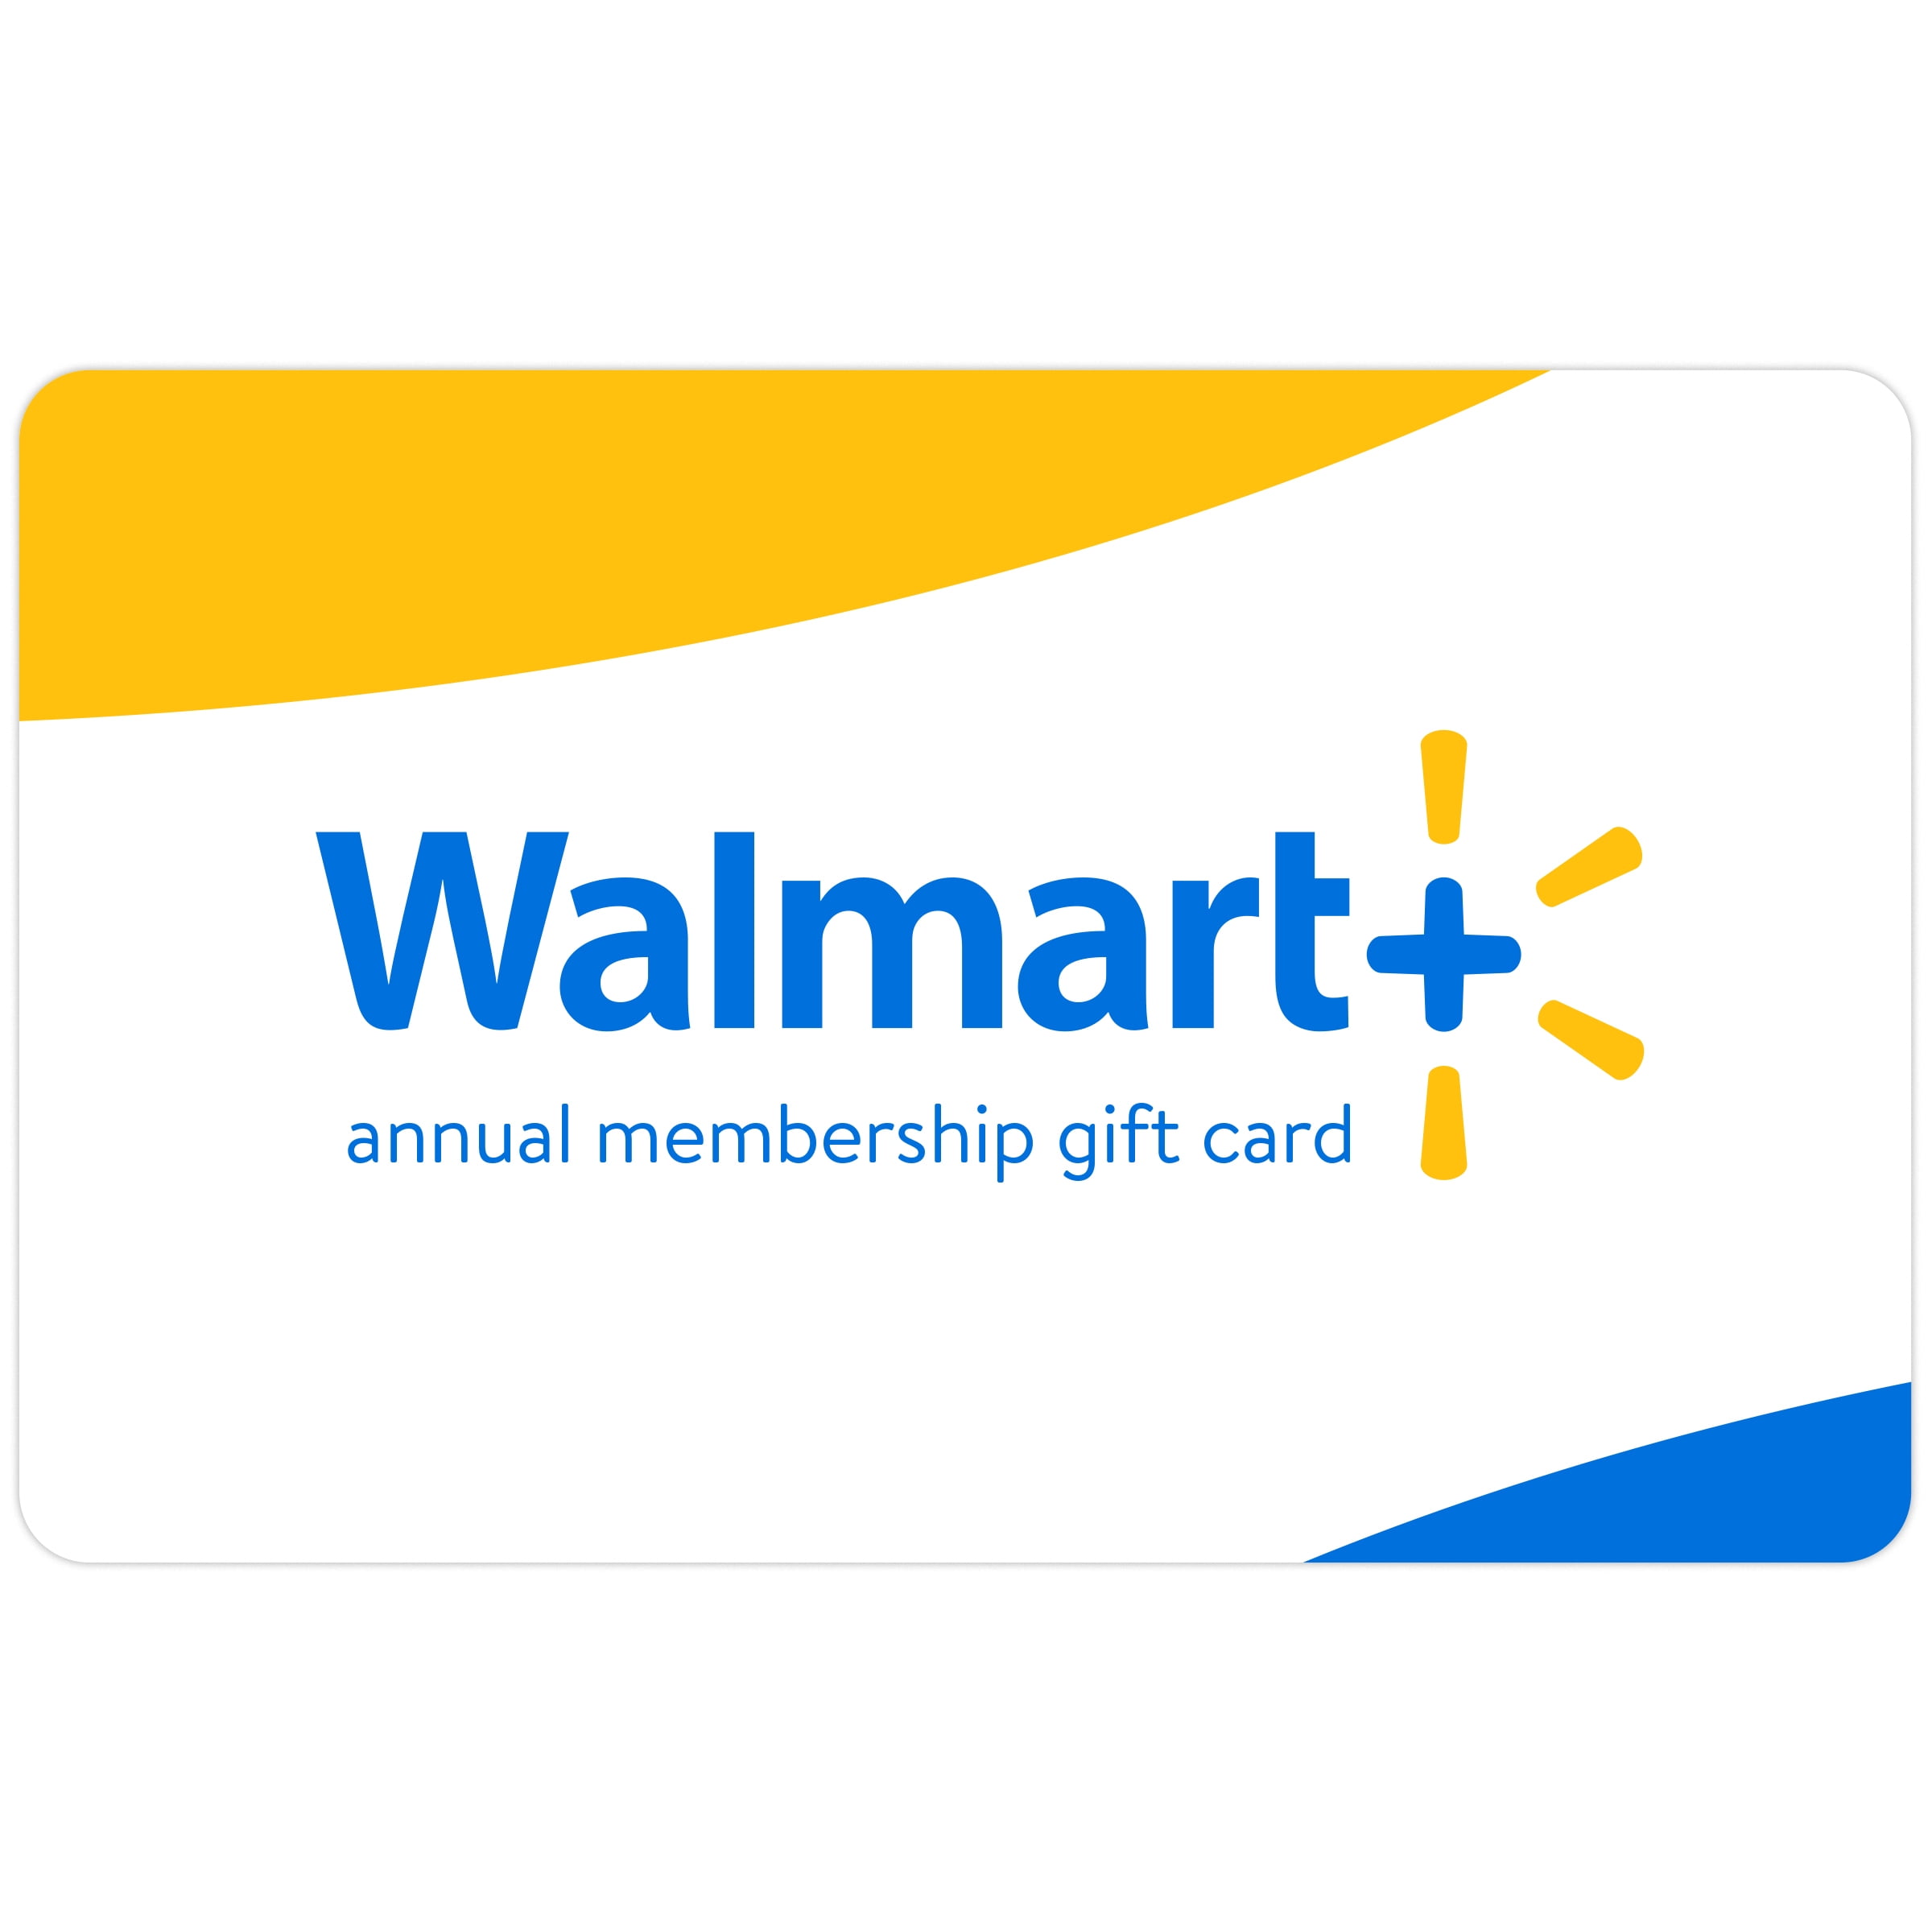 Does Walmart Have Gift Cards?